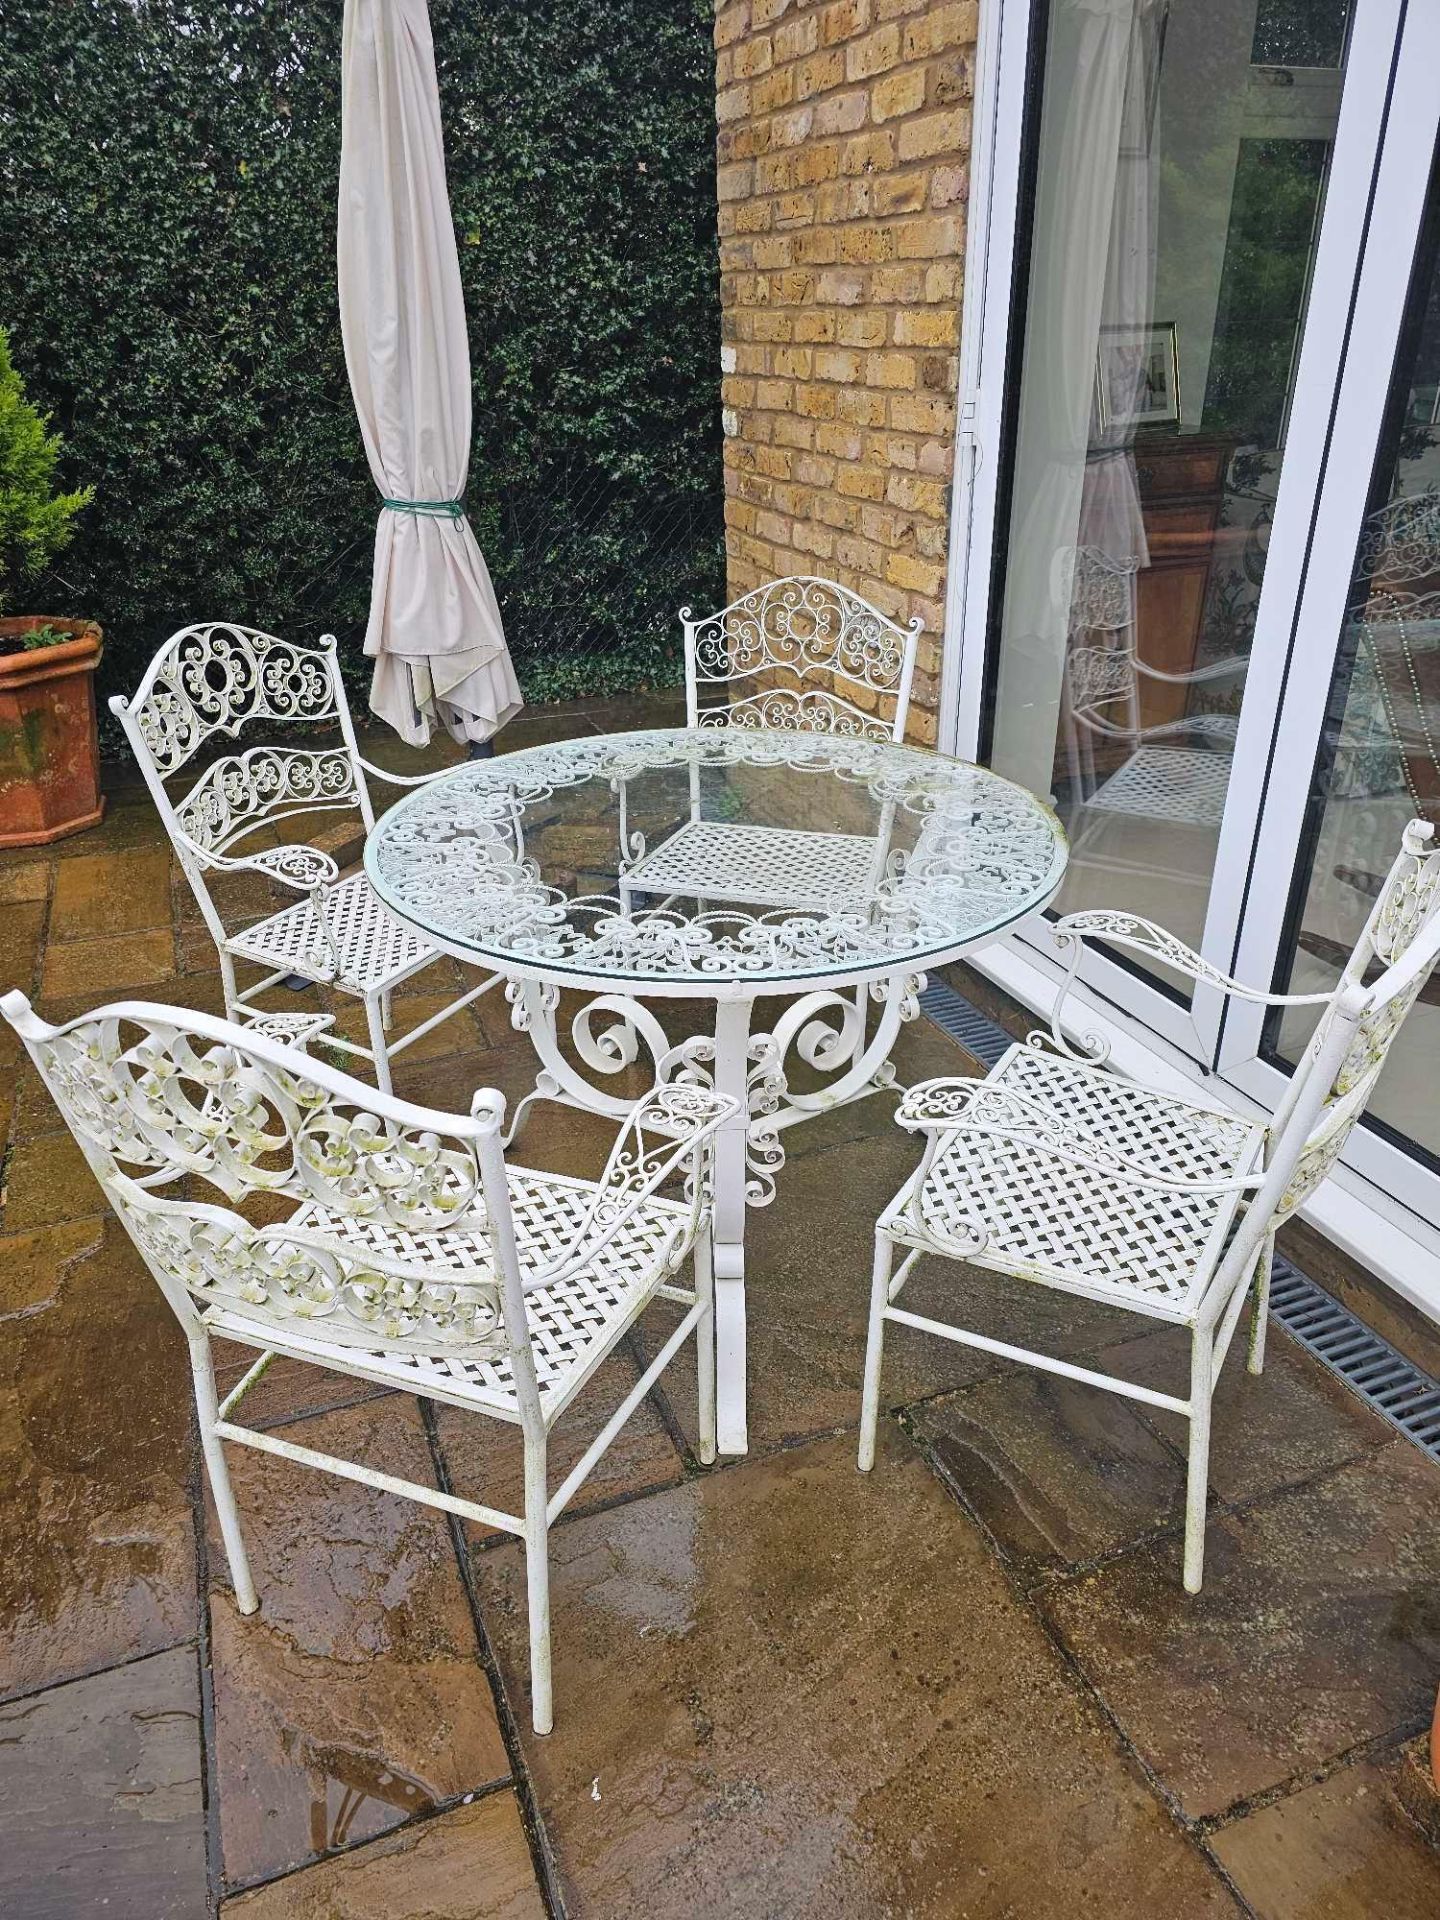 A Wrought Iron Painted White Glass Topped Garden Table Complete With 4 Chairs And A Parasol With - Image 2 of 6